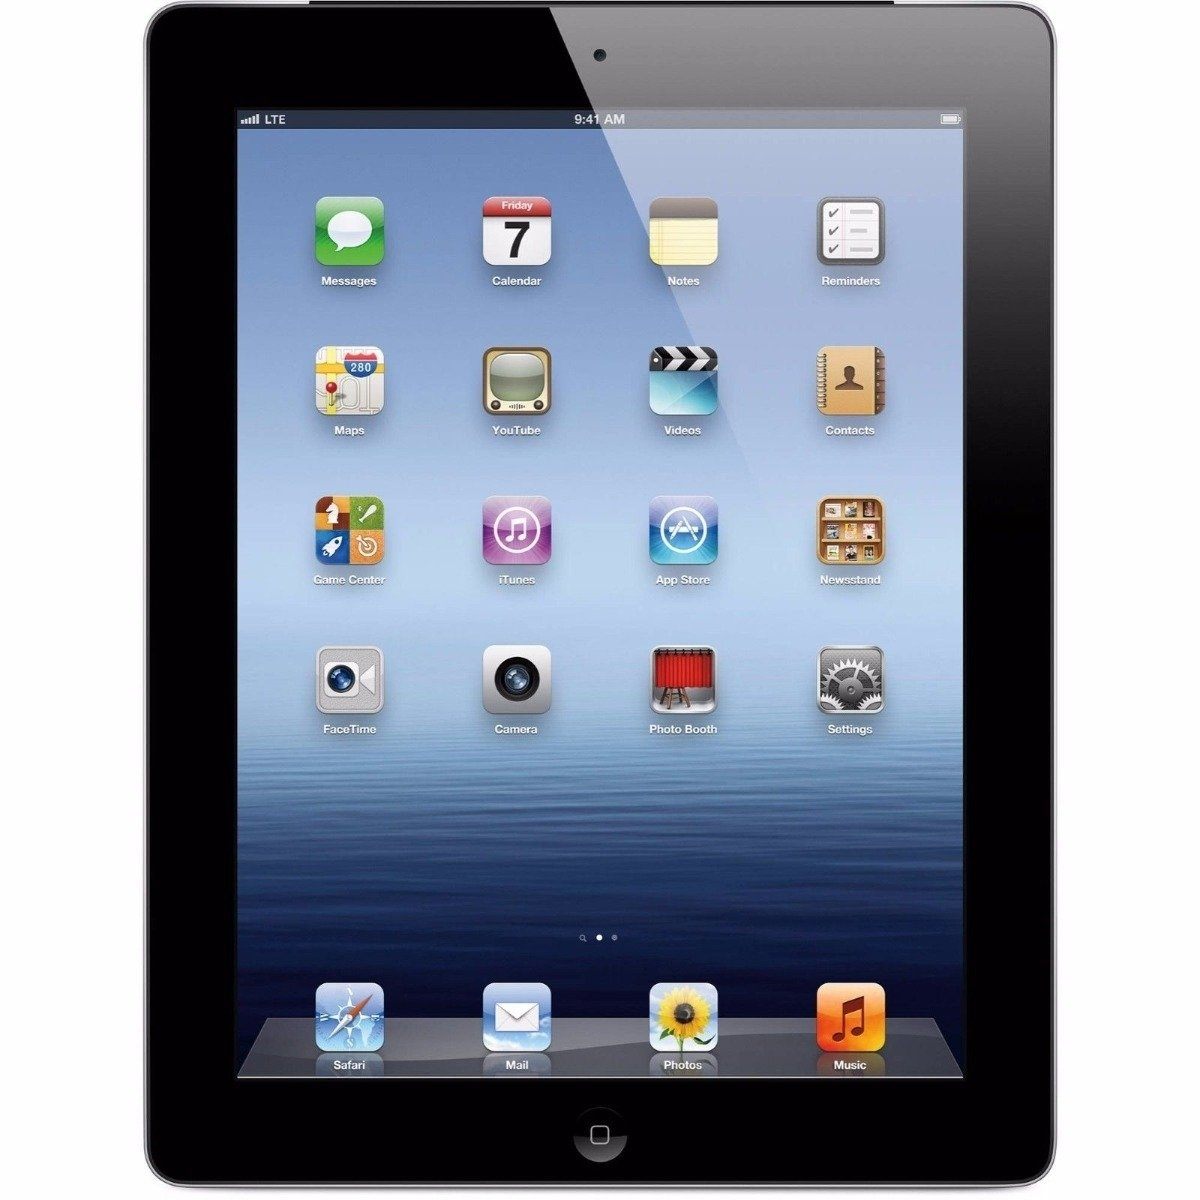 Apple iPad 2 WiFi + 3G Factory Unlocked - Assorted Colors and Sizes / Black / 32GB